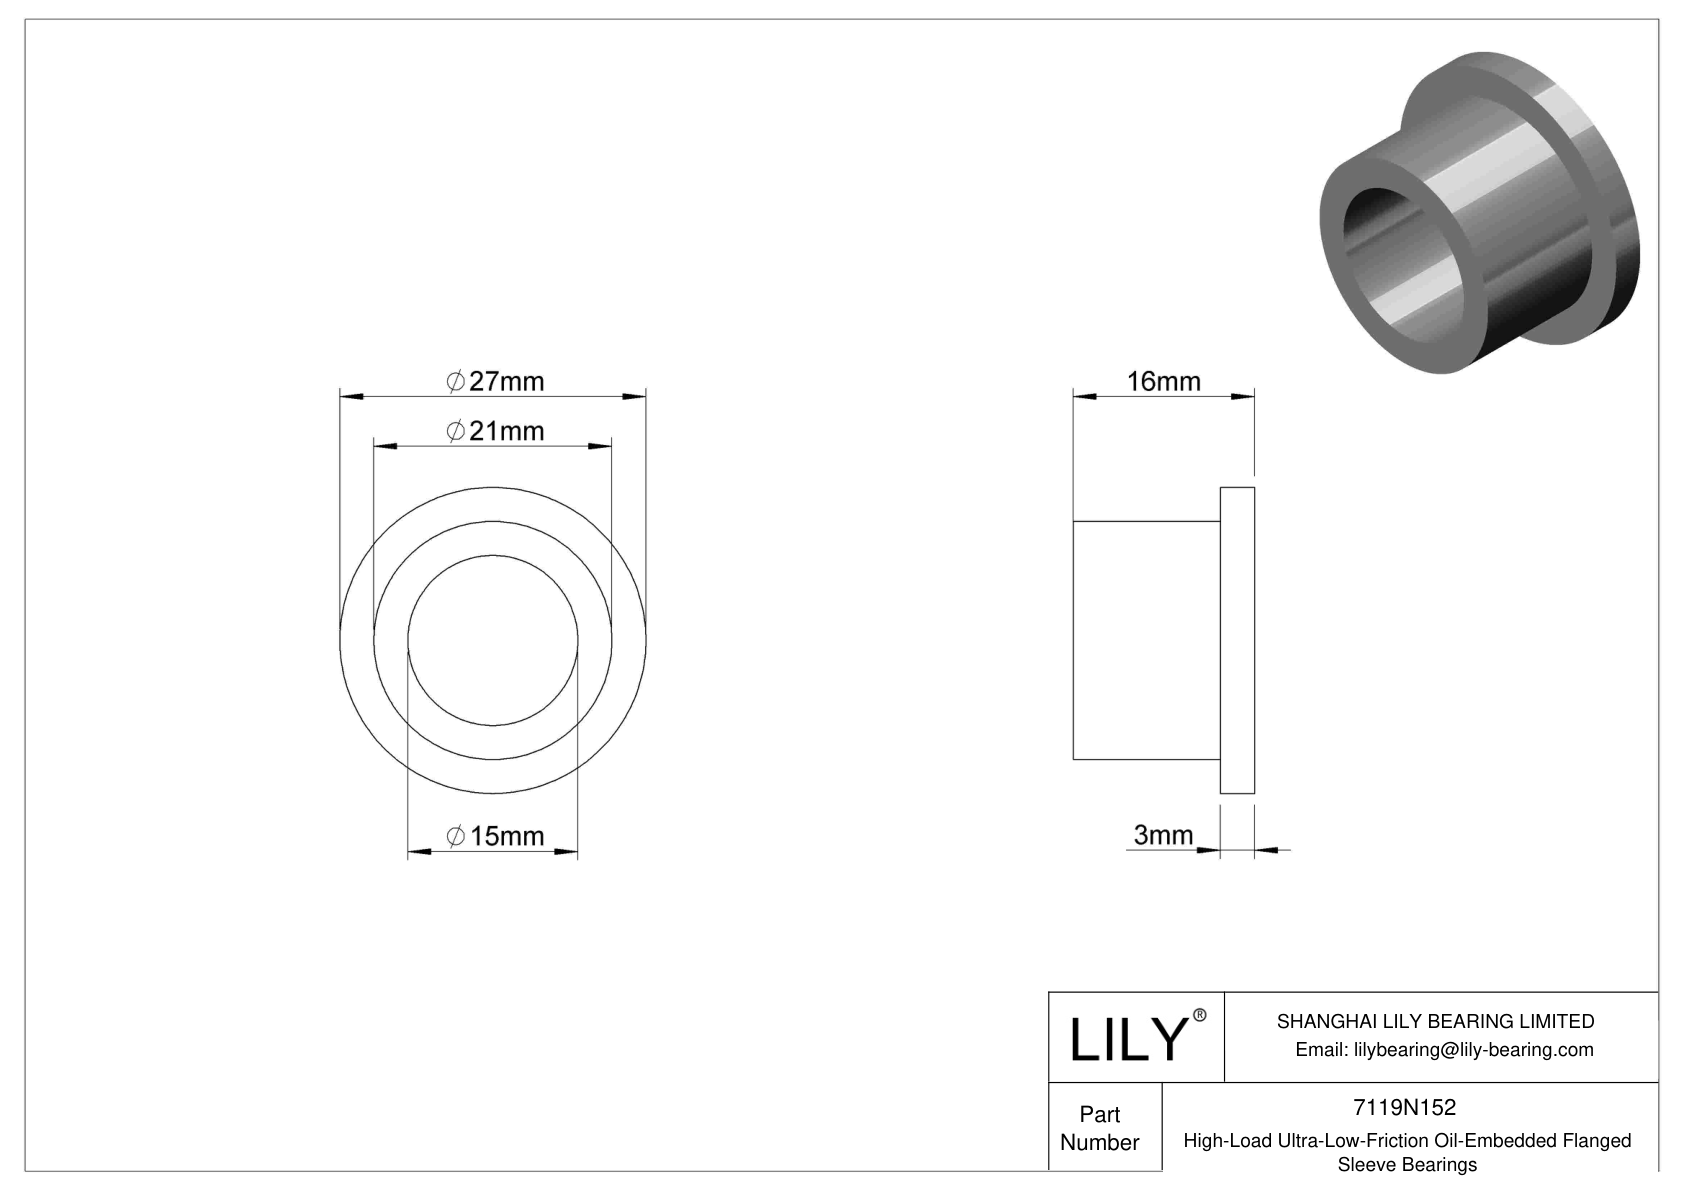 HBBJNBFC High-Load Ultra-Low-Friction Oil-Embedded Flanged Sleeve Bearings cad drawing